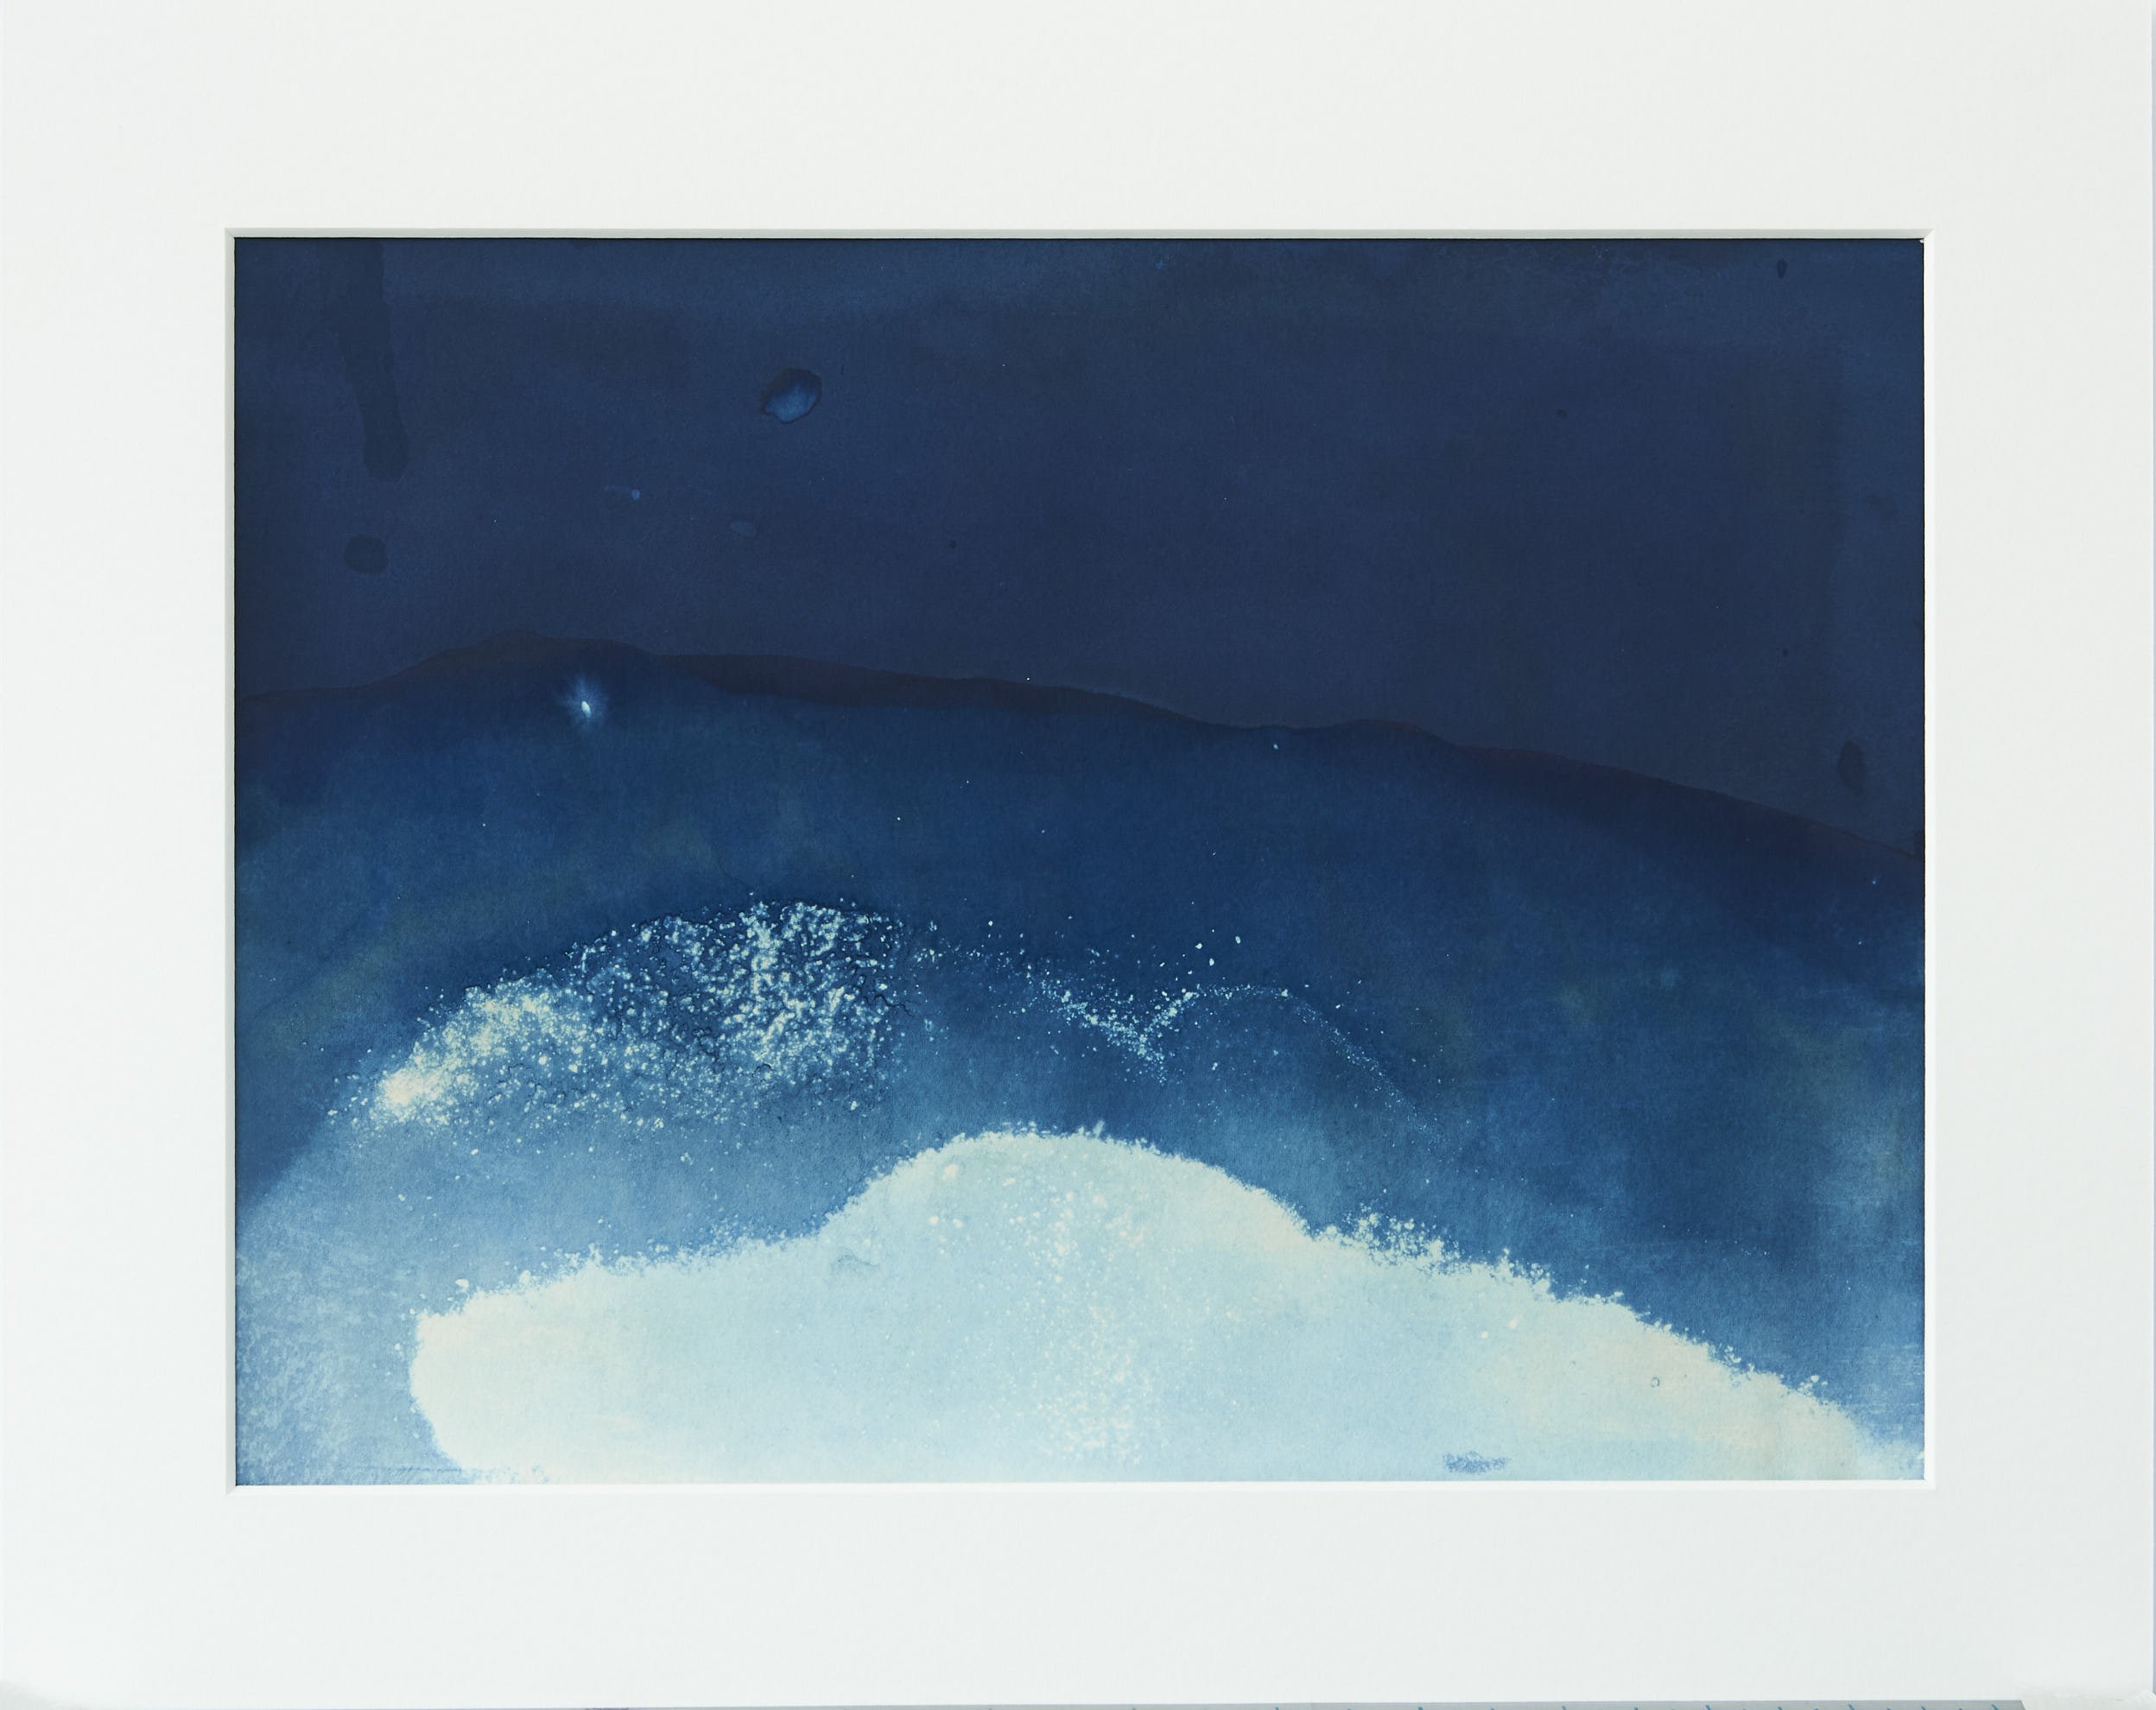  IL-Gwithian-2022-018 Cyanotype on paper  Print 9x12in  